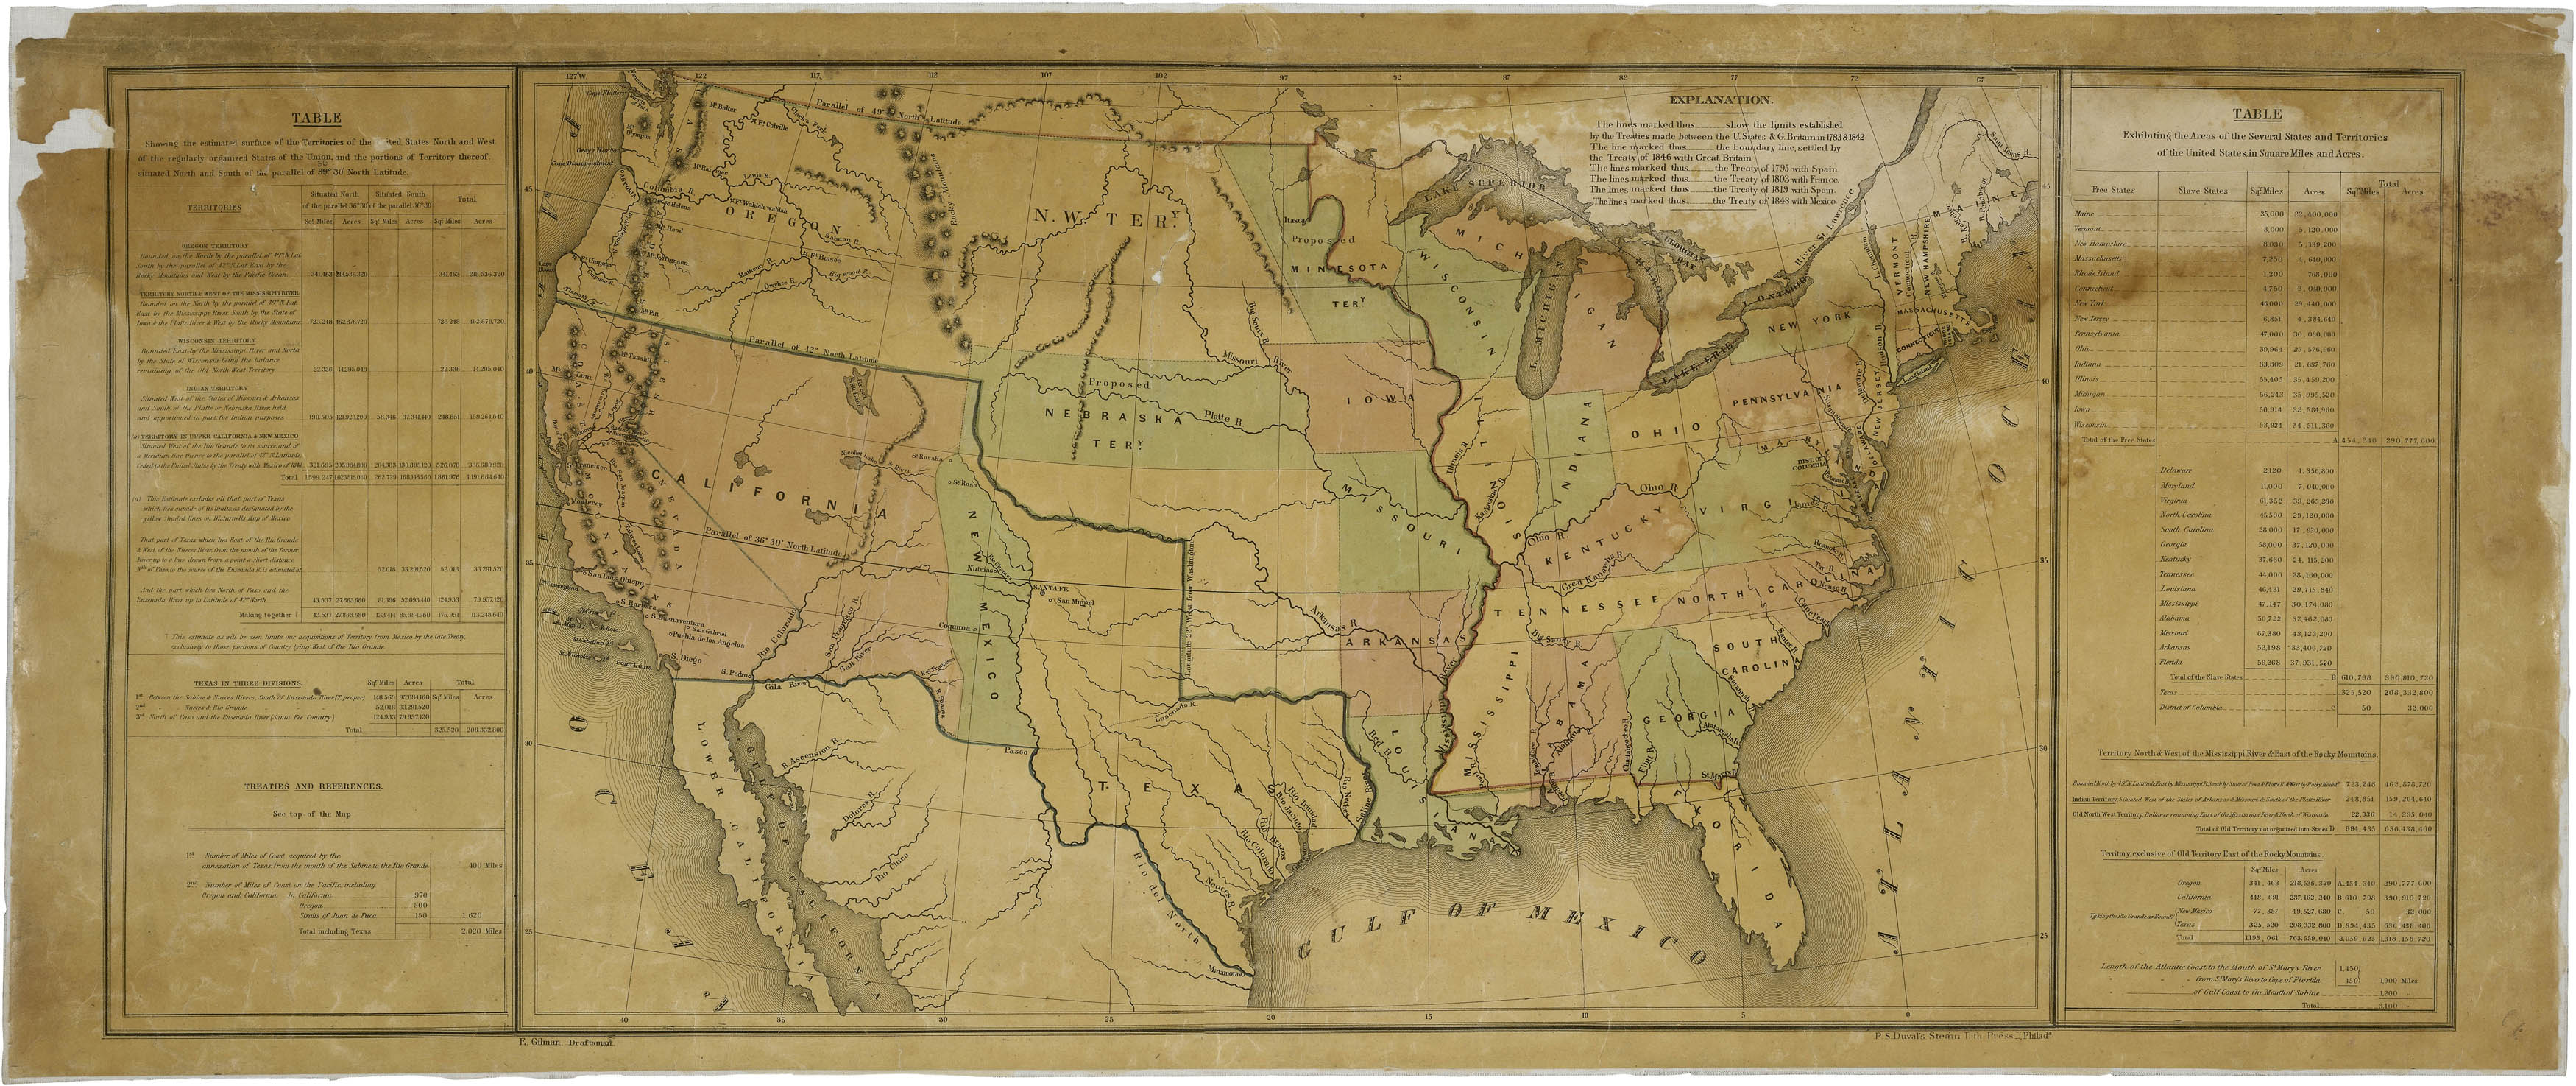 Gilman's 1848 map of the United States